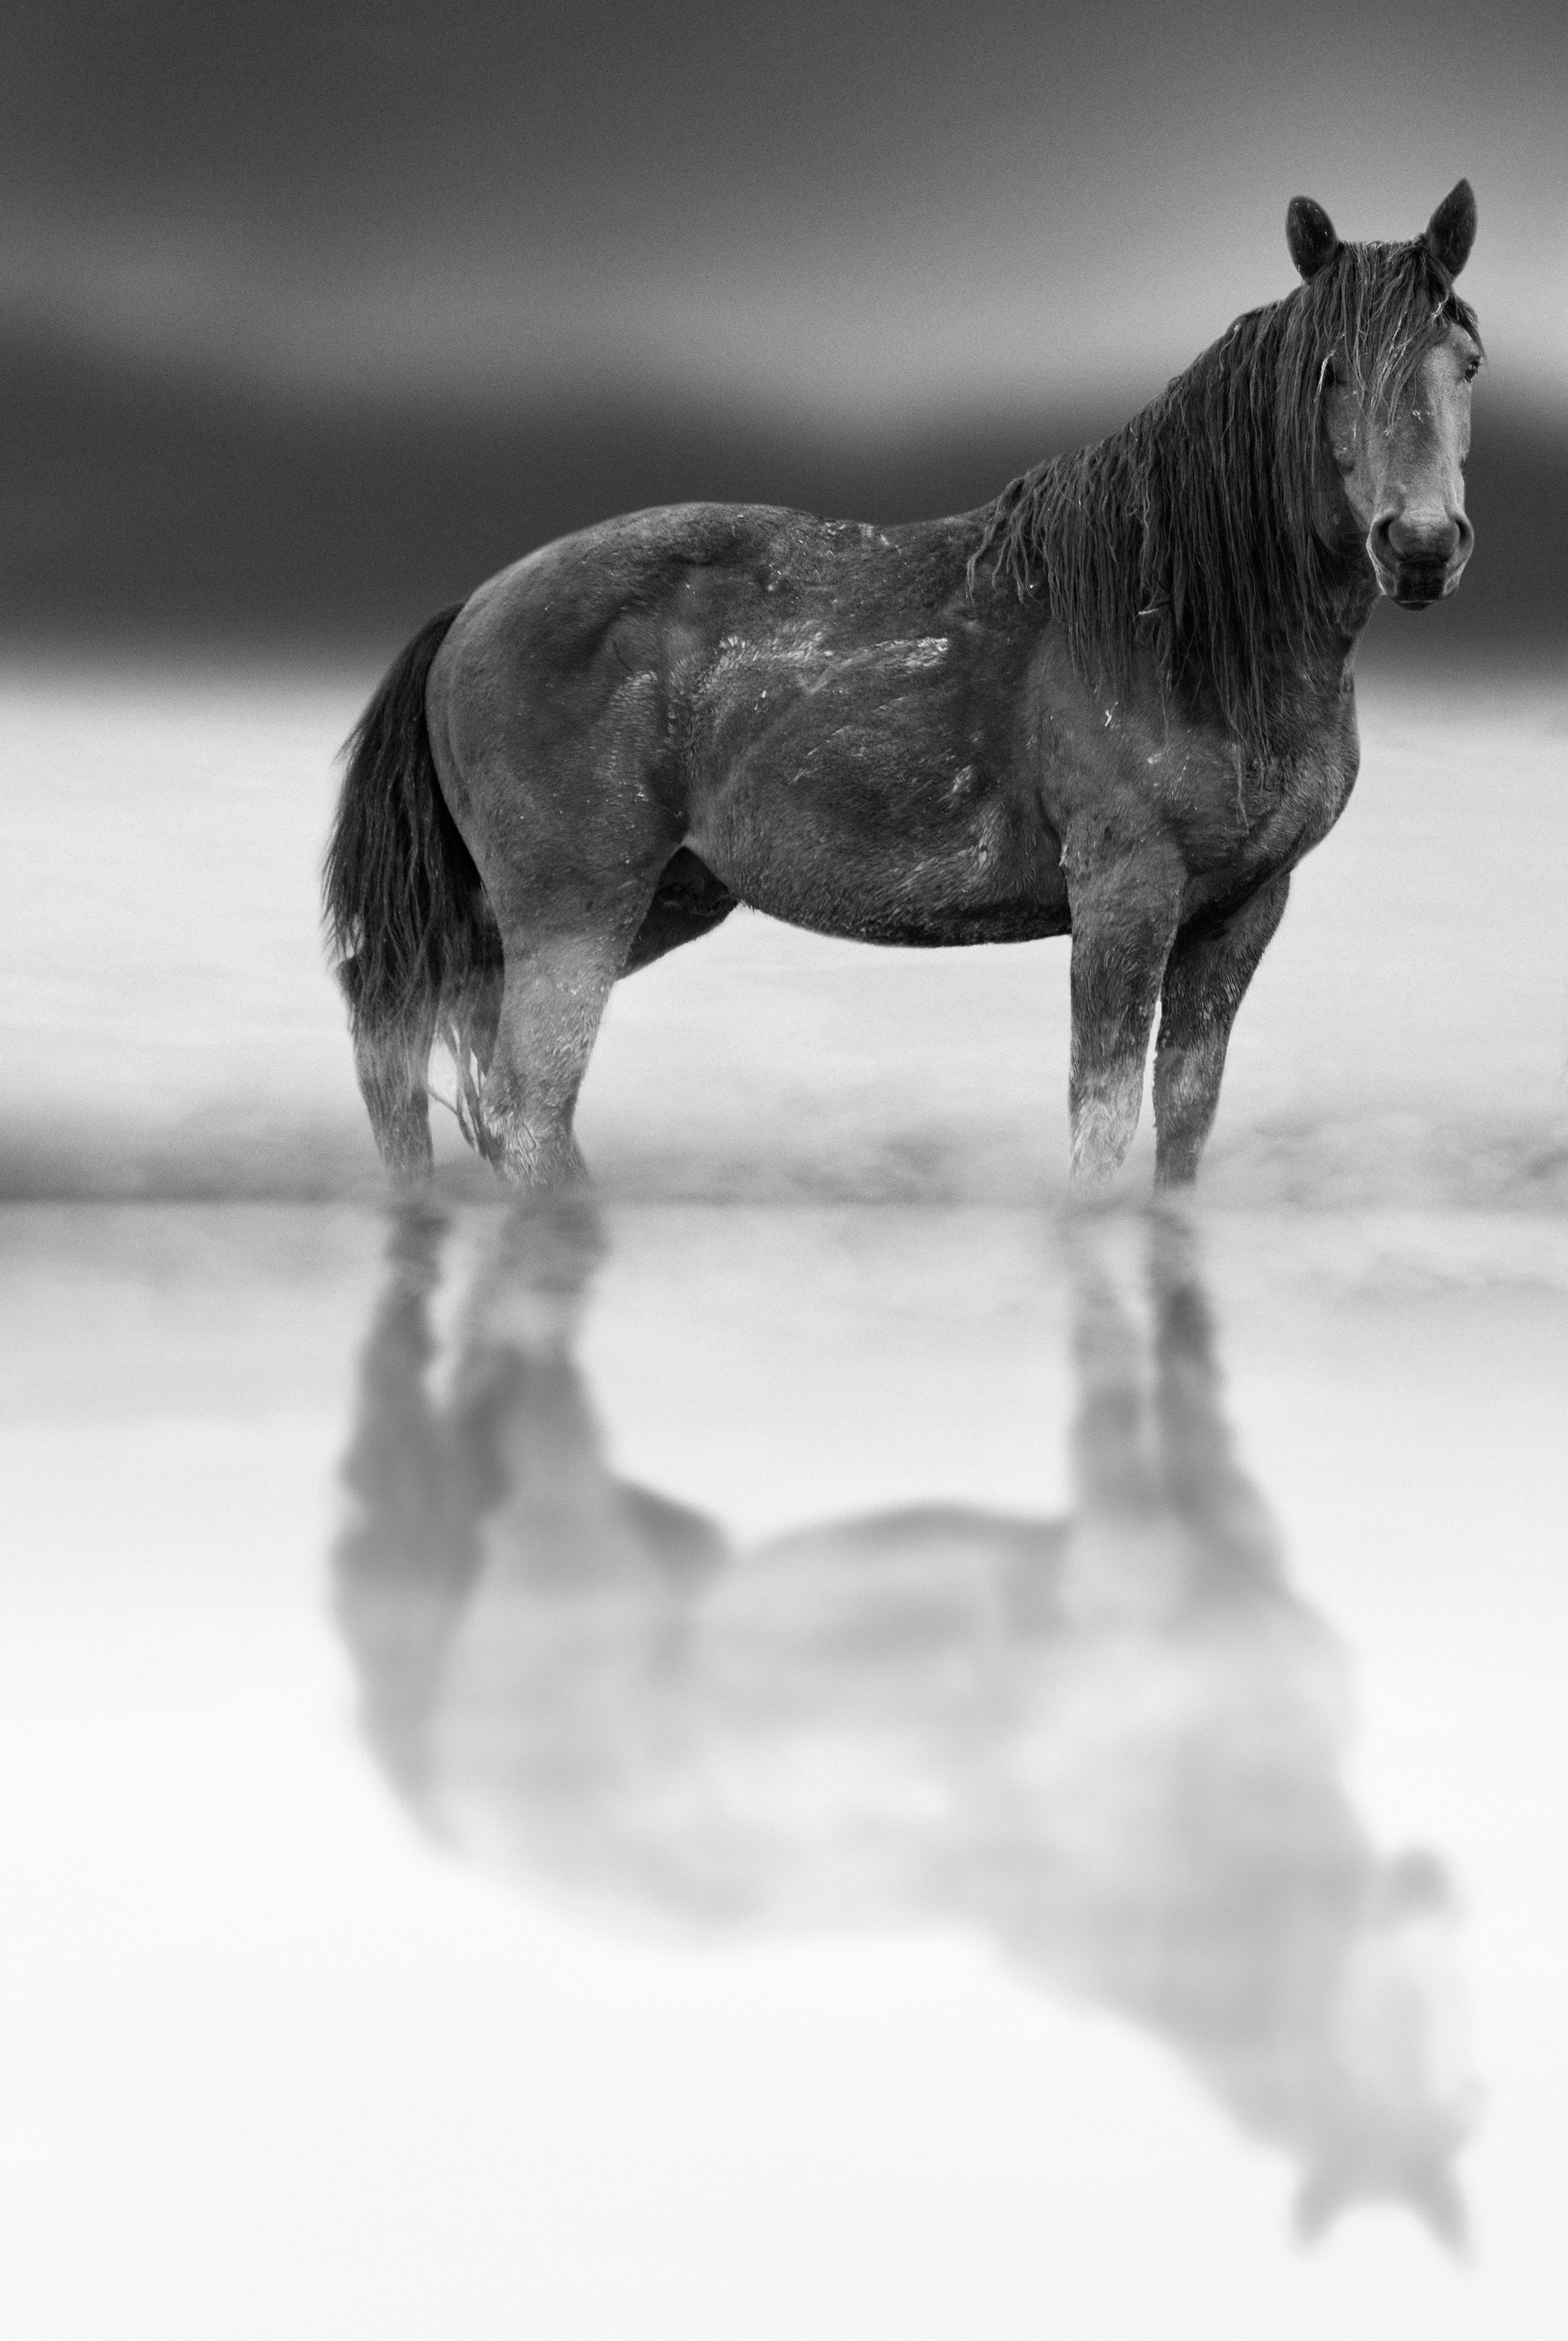 Shane Russeck Black and White Photograph - "Belle Starr" 60 x 40 -Wild Horse - Mustang Photograph Photography Art Unsinged